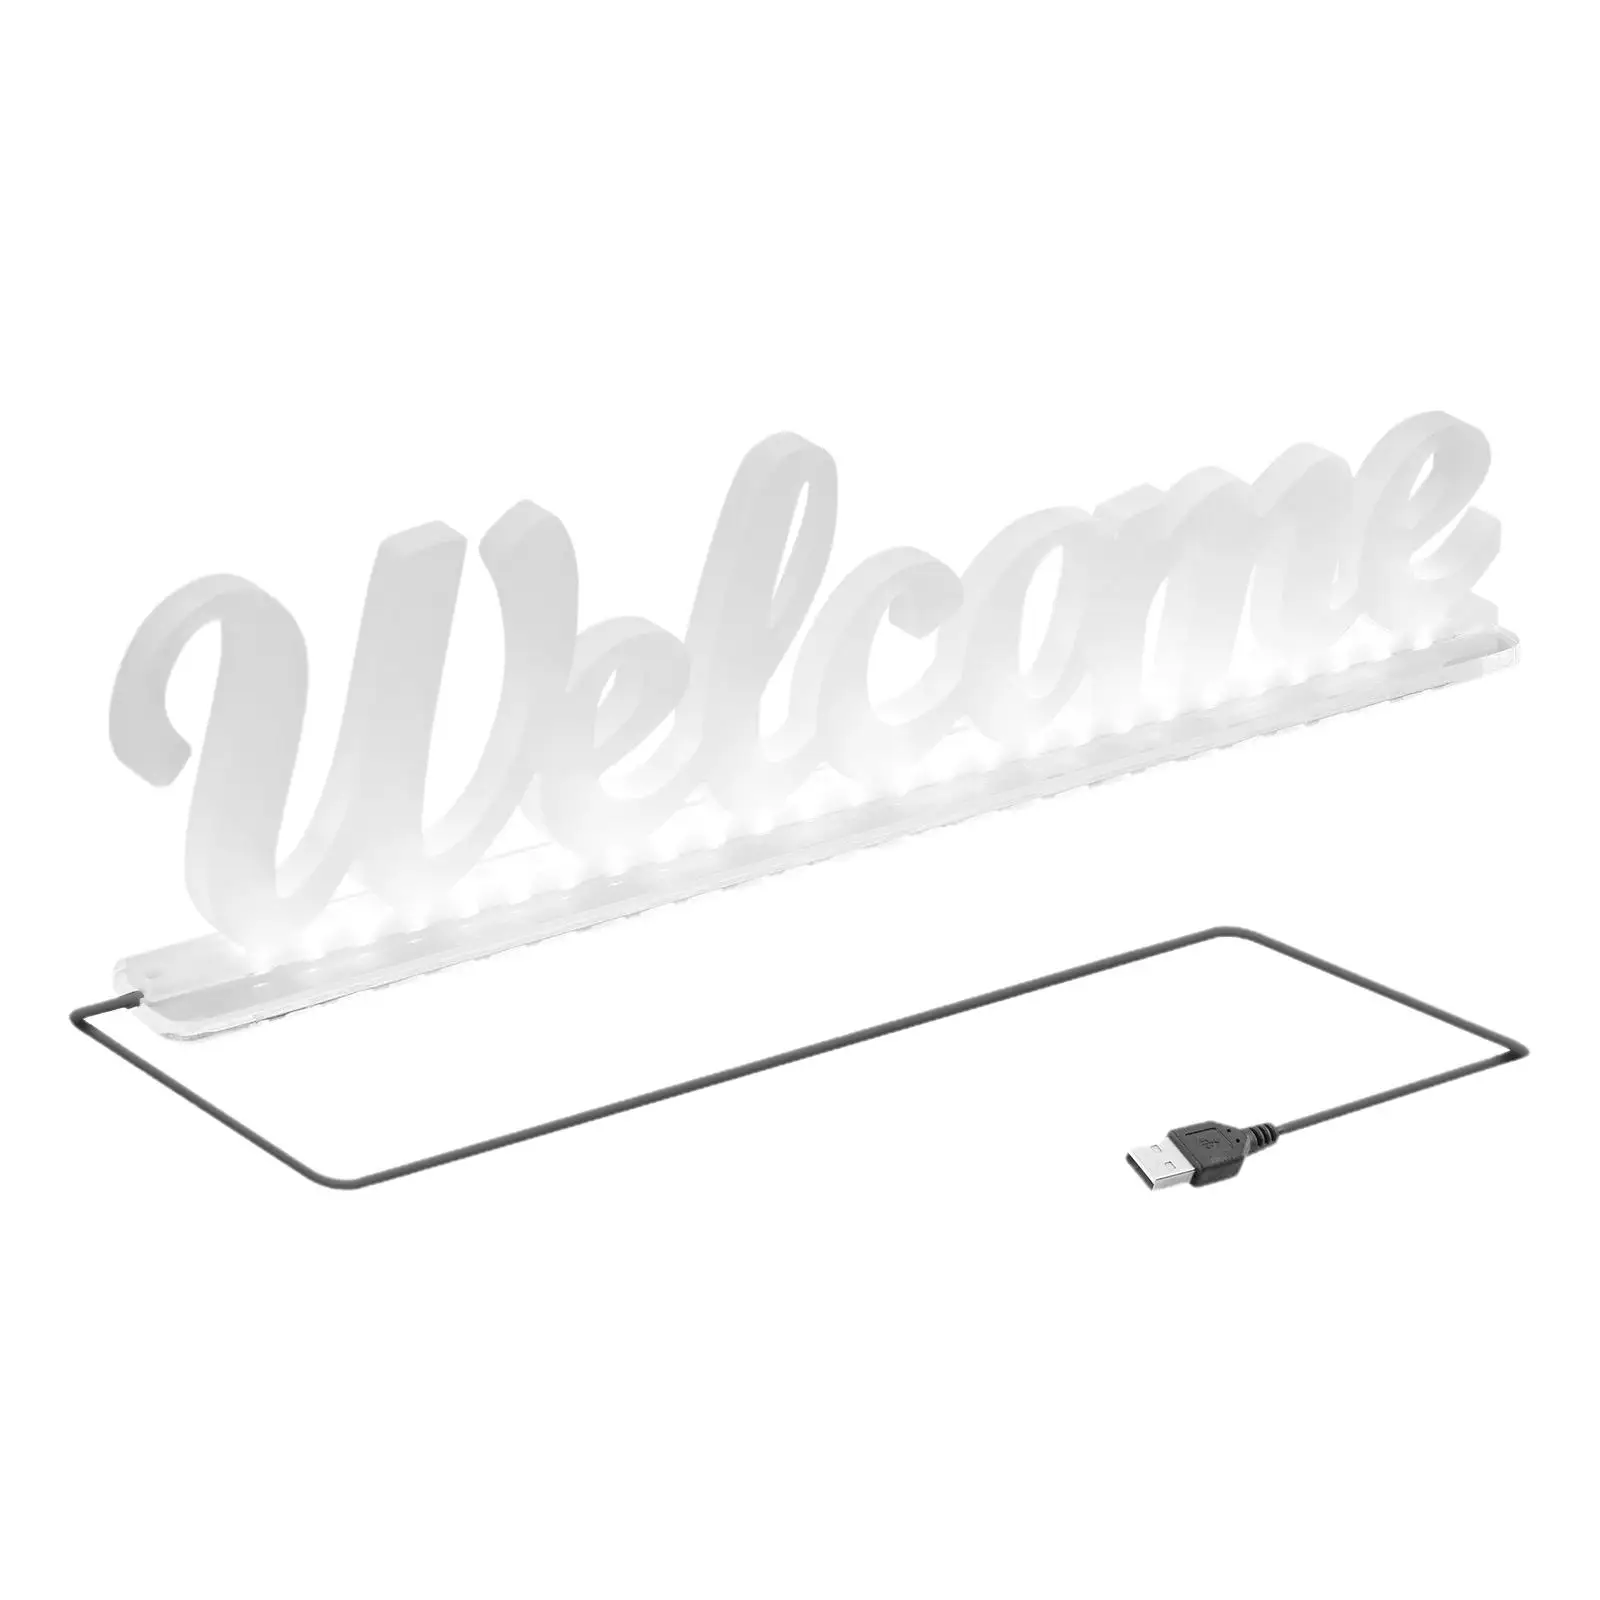 Welcome Neon Signs USB Clear Light up Letters LED Neon Sign Lights Man Cave Neon Light Sign for Bar Pub Tabletop Cafe Art Lights